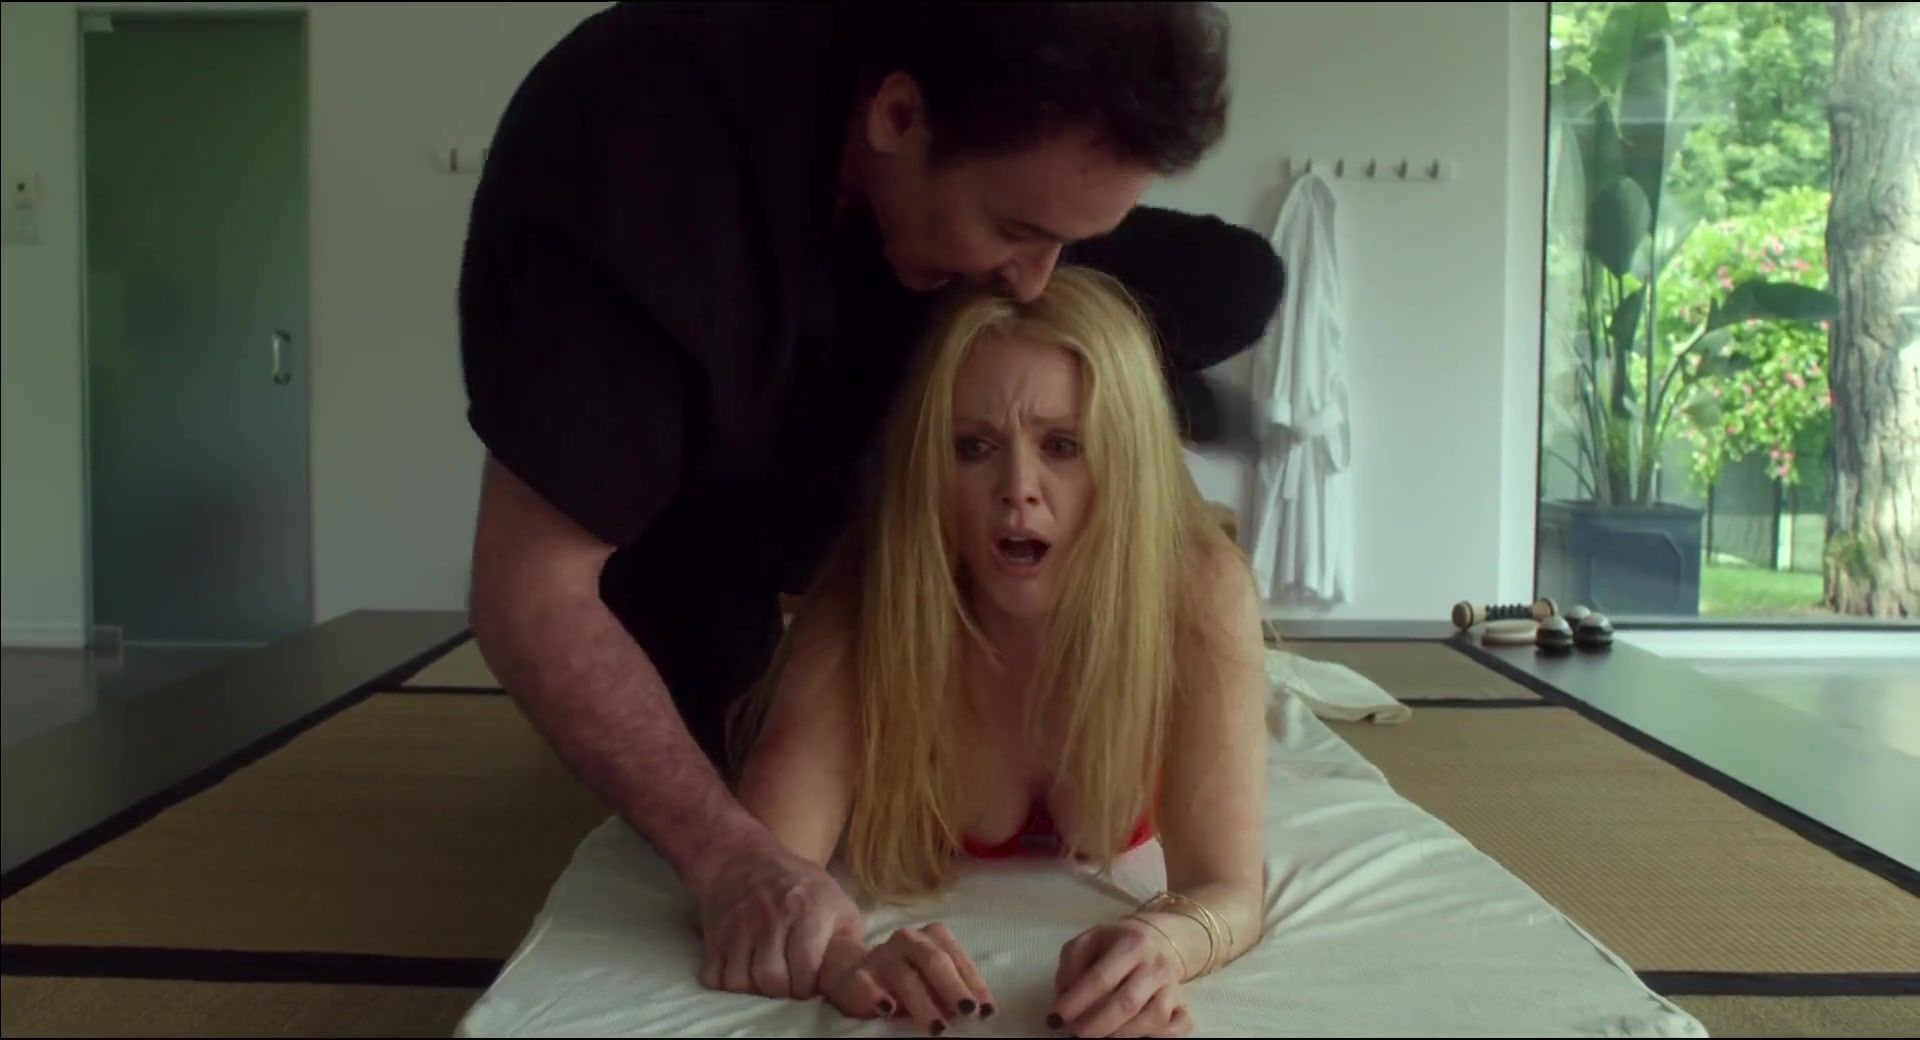 Stepfather Submission video & Lesbian Celebs Scene | Celebrity: Julianne Moore nude | The movie "Maps to the Stars" Pussy Fuck